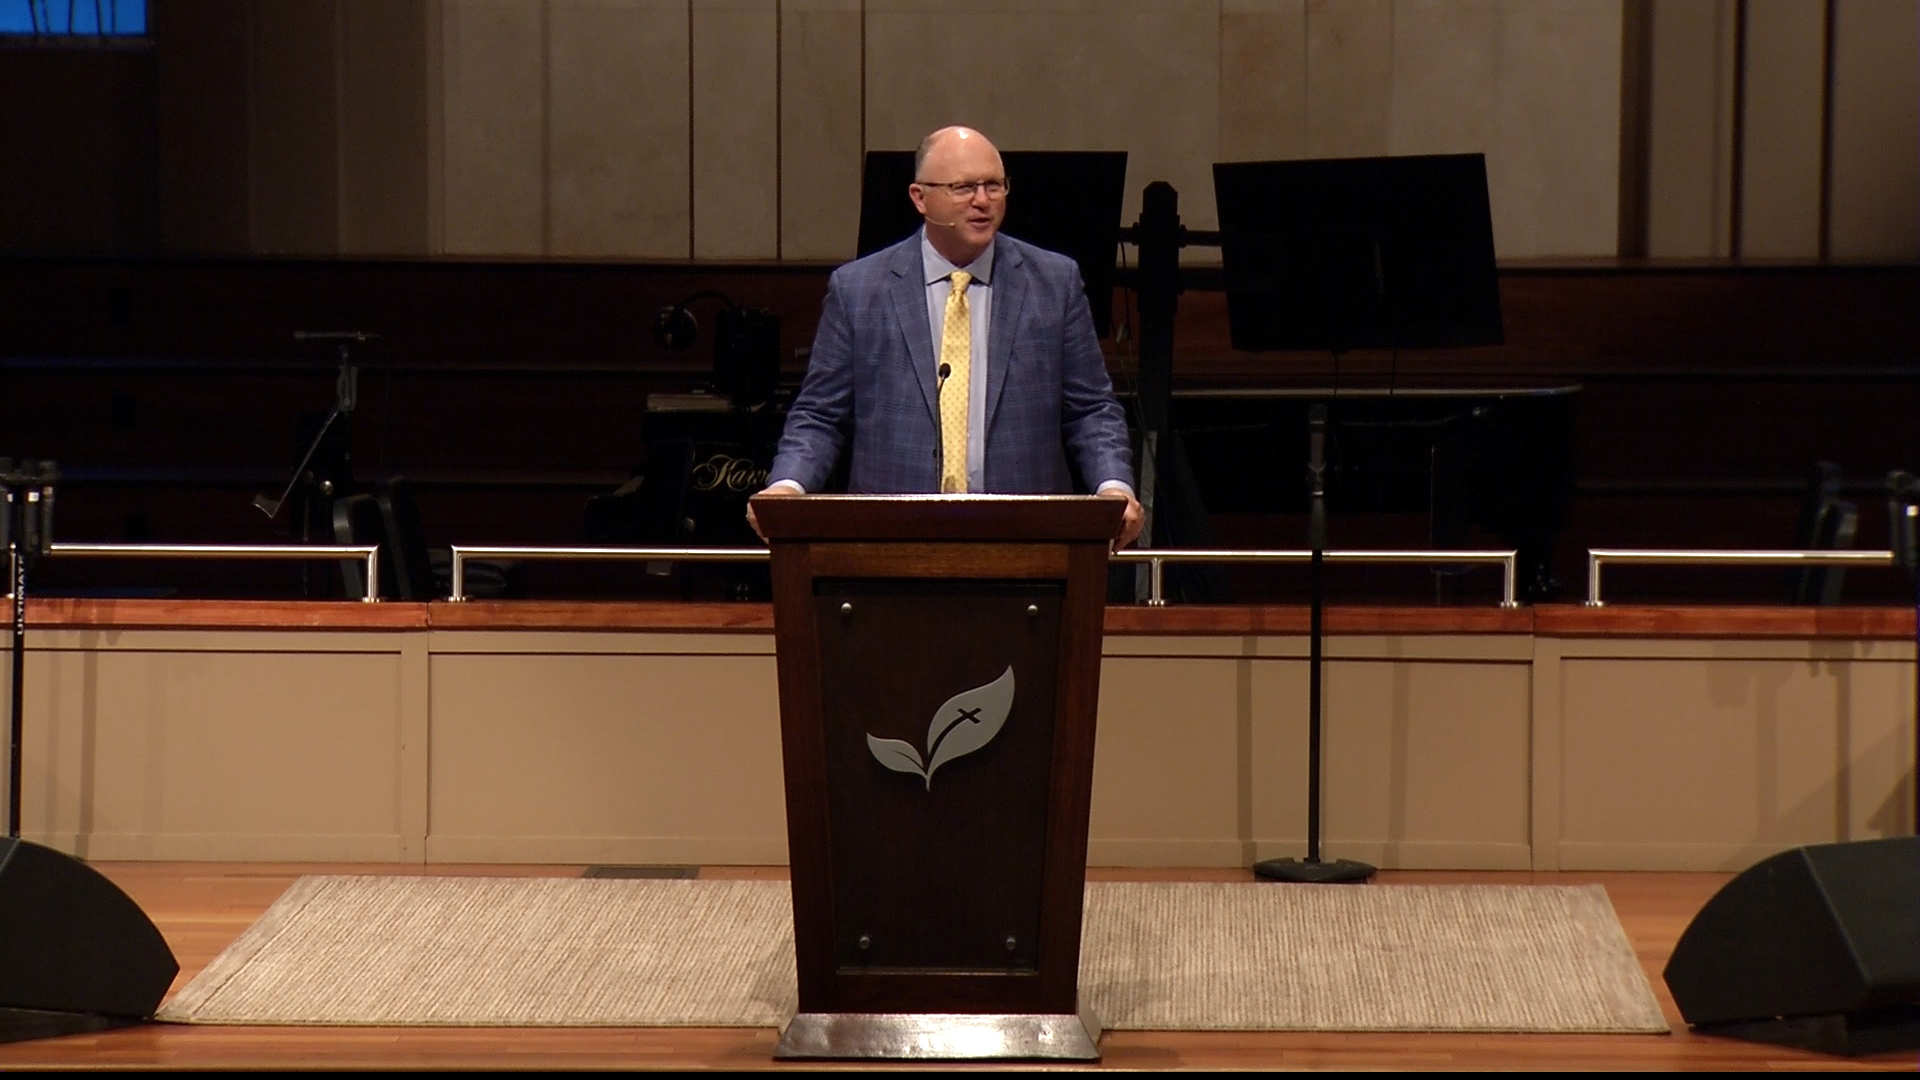 Pastor Paul Chappell: In Pursuit of the Heavenly